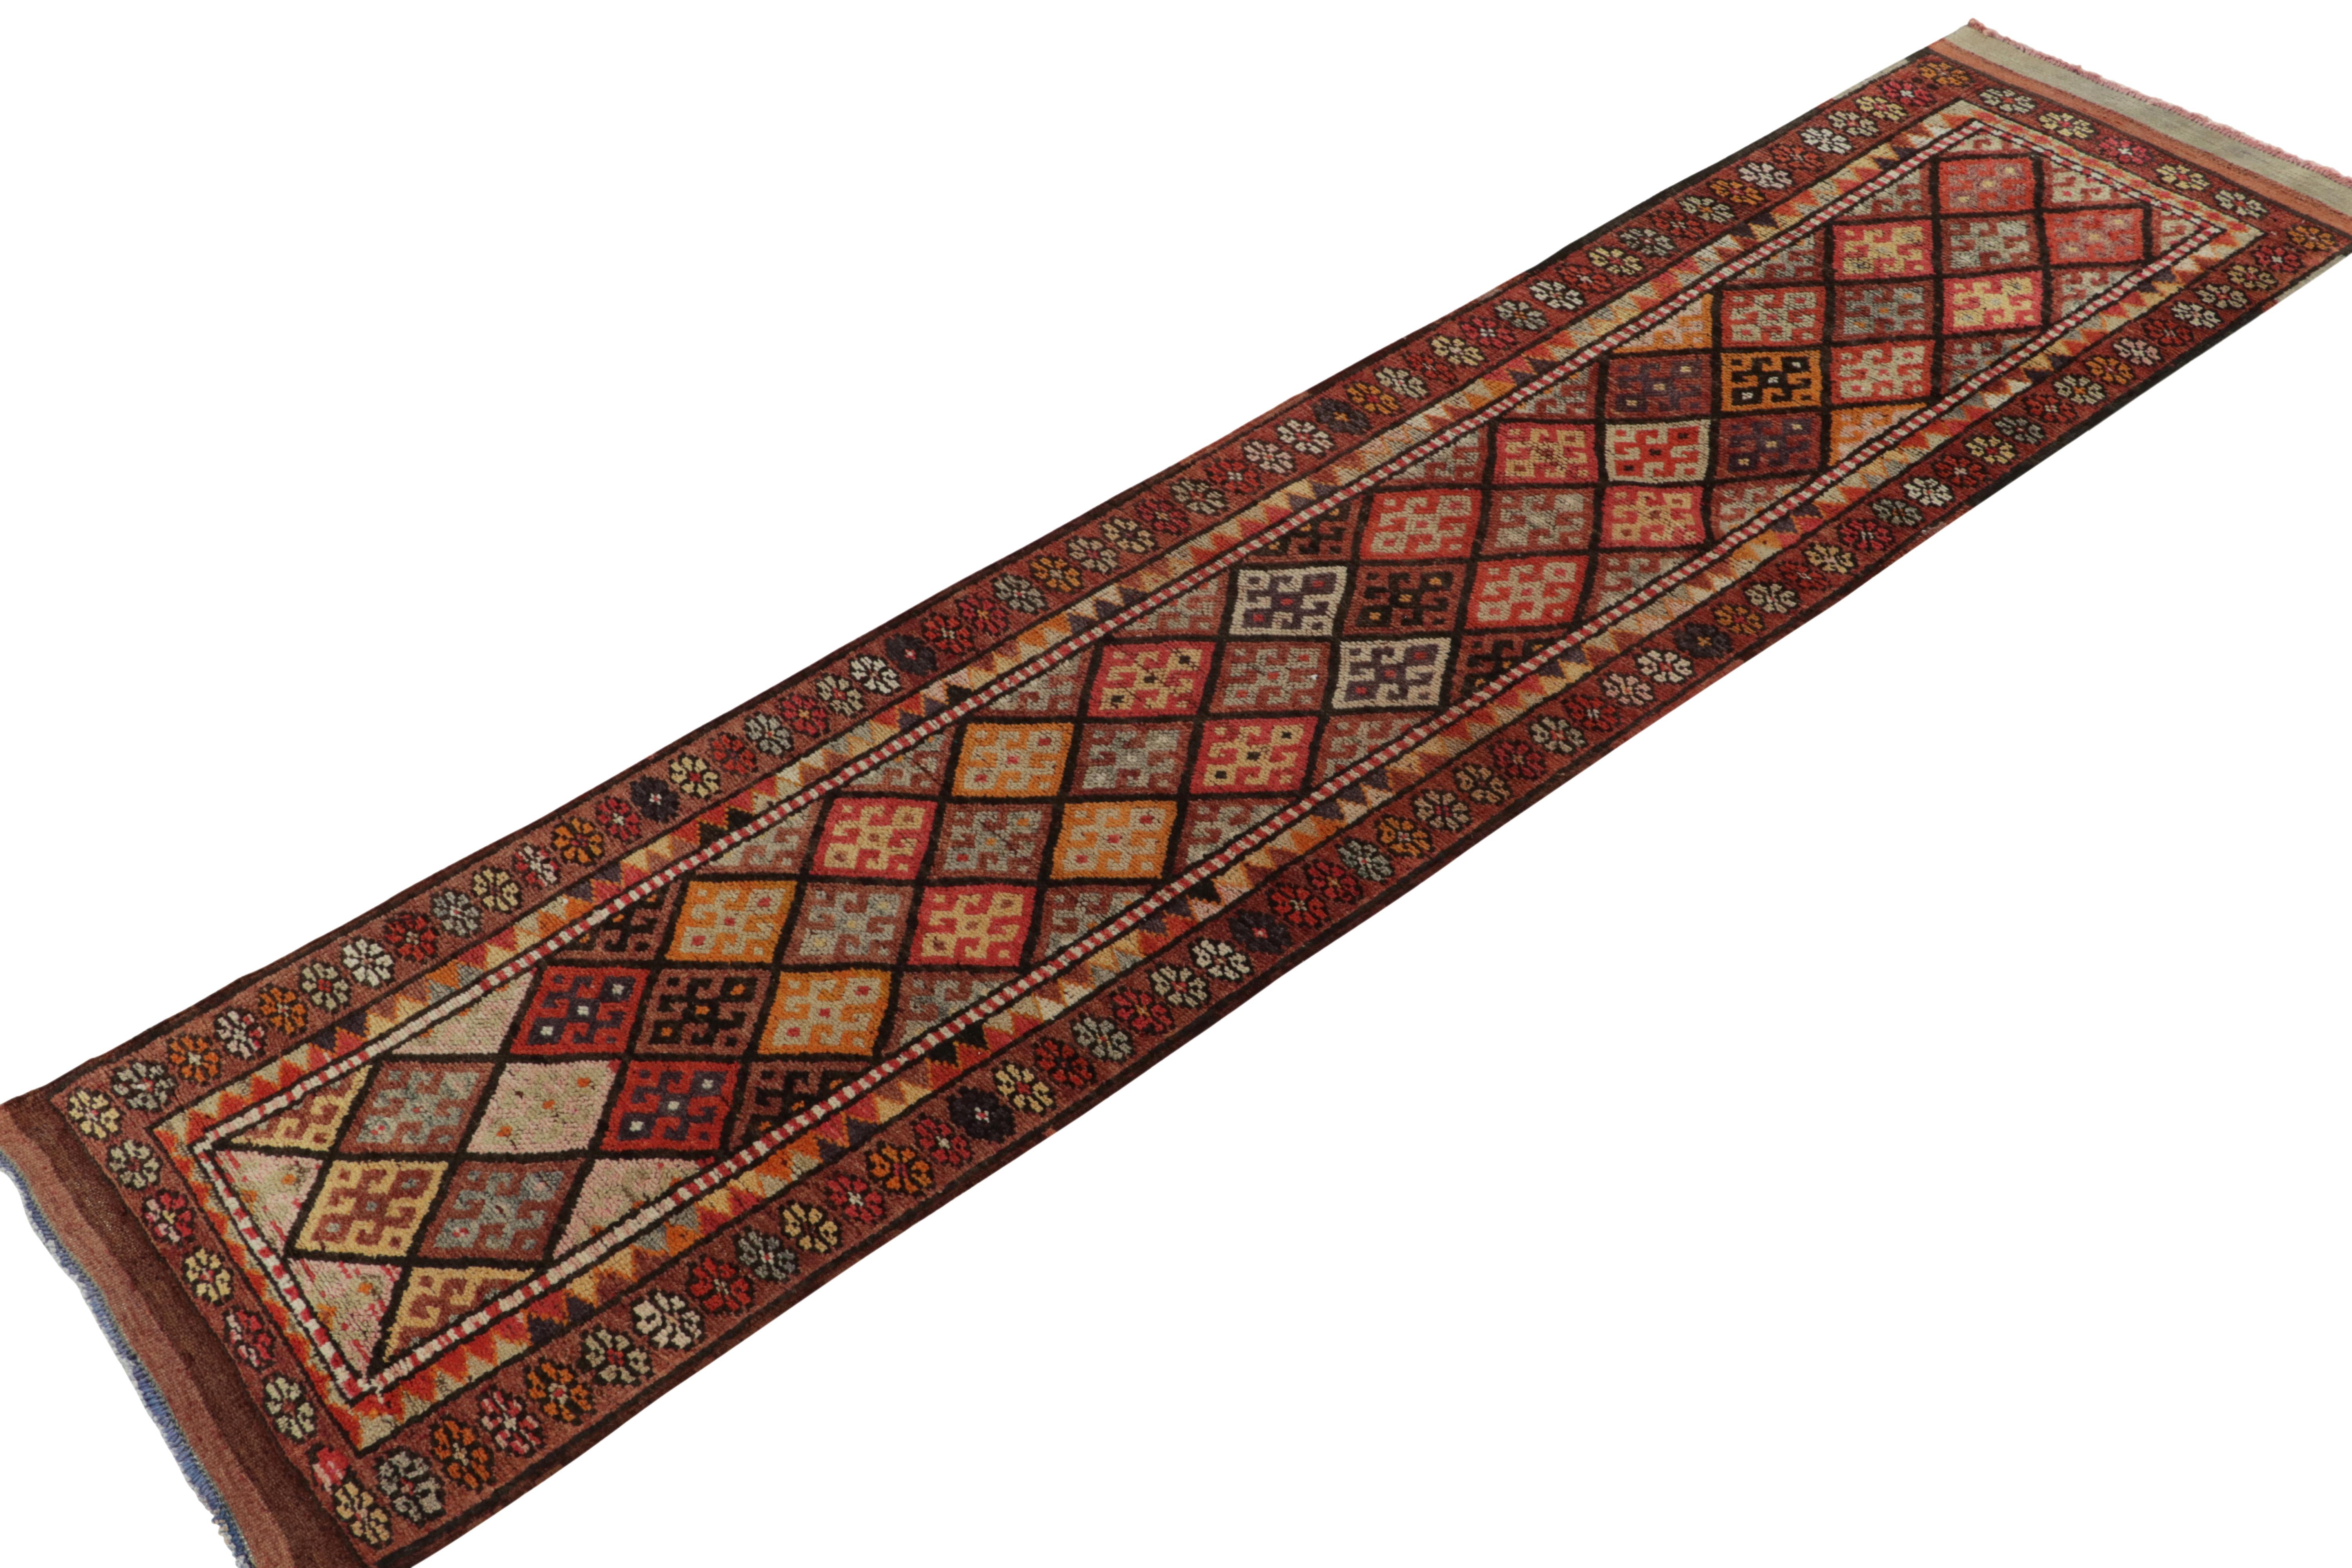 From R&K Principal Josh Nazmiyal’s prized acquisitions, a distinct vintage runner originating from Turkey circa 1950-1960. 

On the Design: The symmetric geometric design features traditional motifs encased in diamond patterns continuing from end